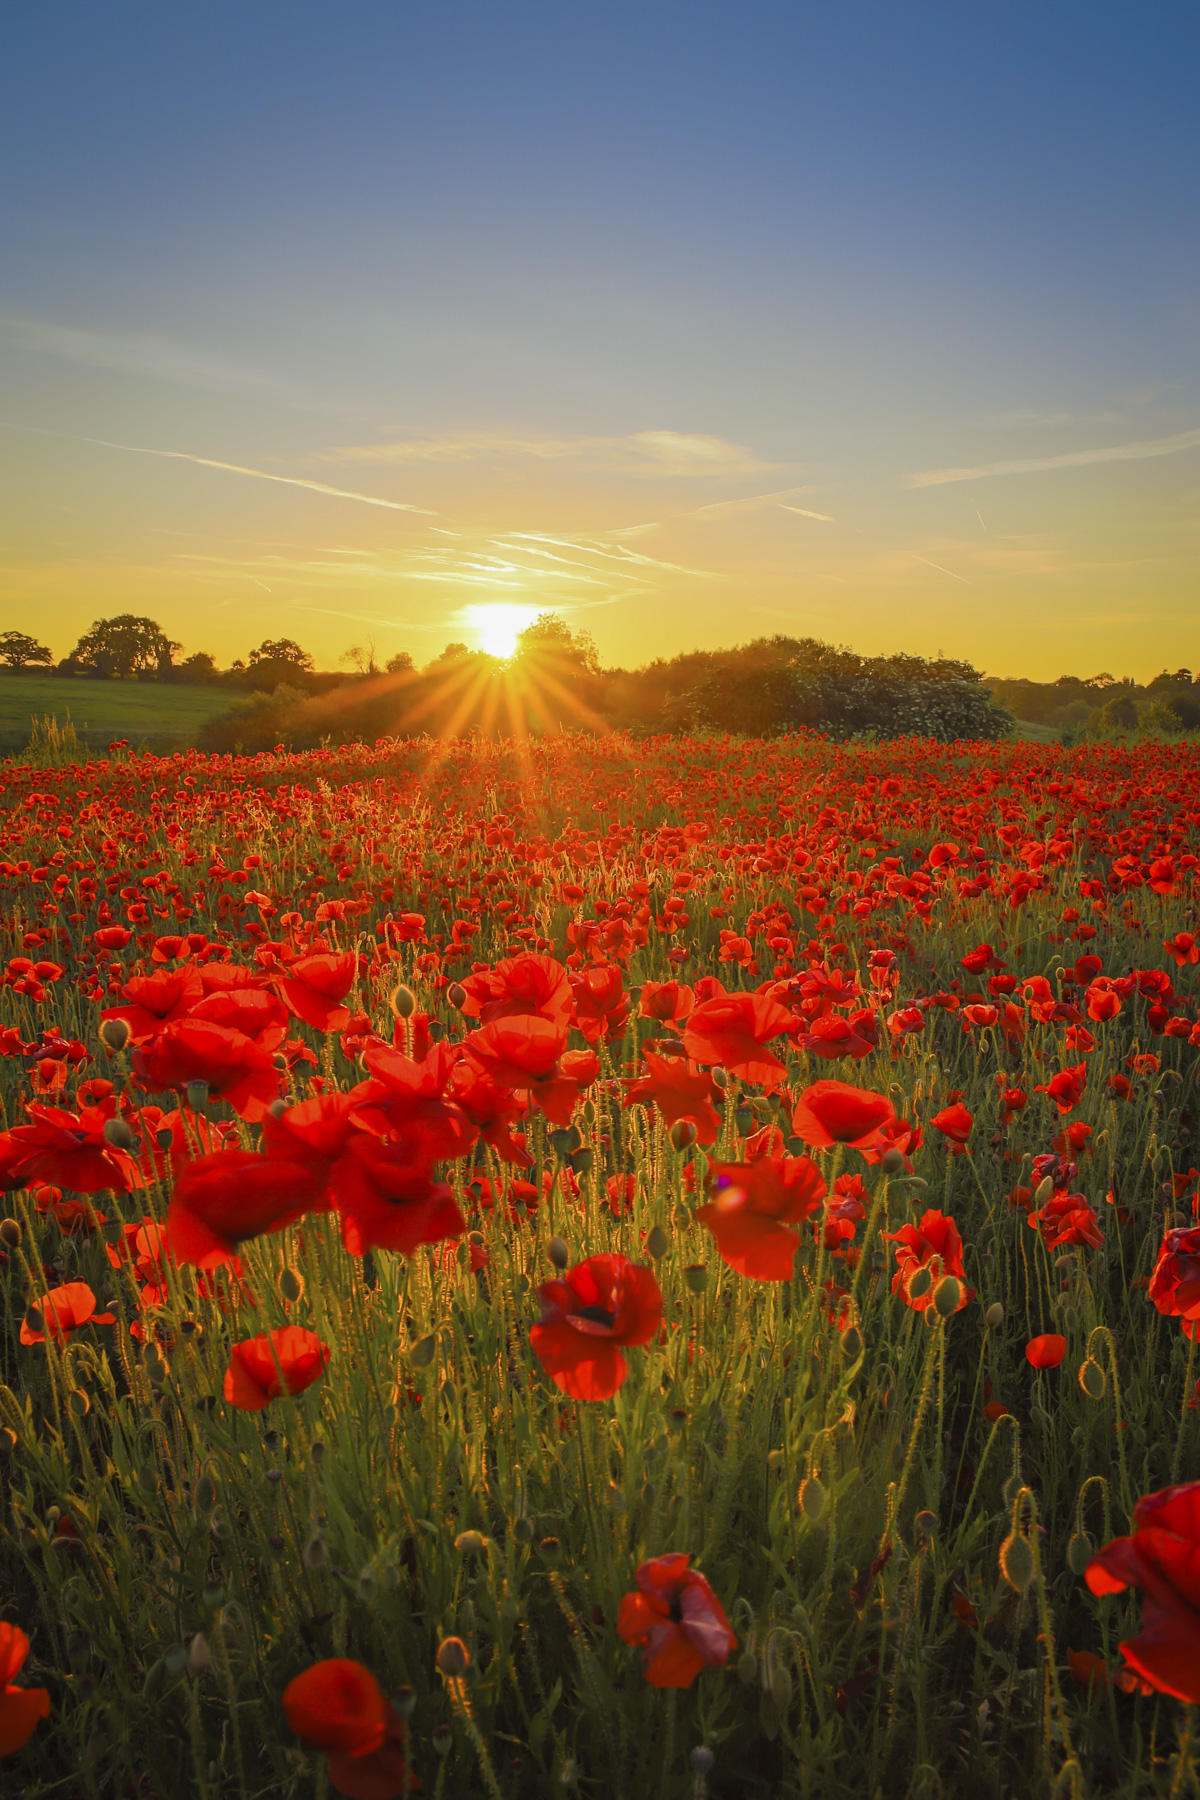 Field of poppies at golden hour